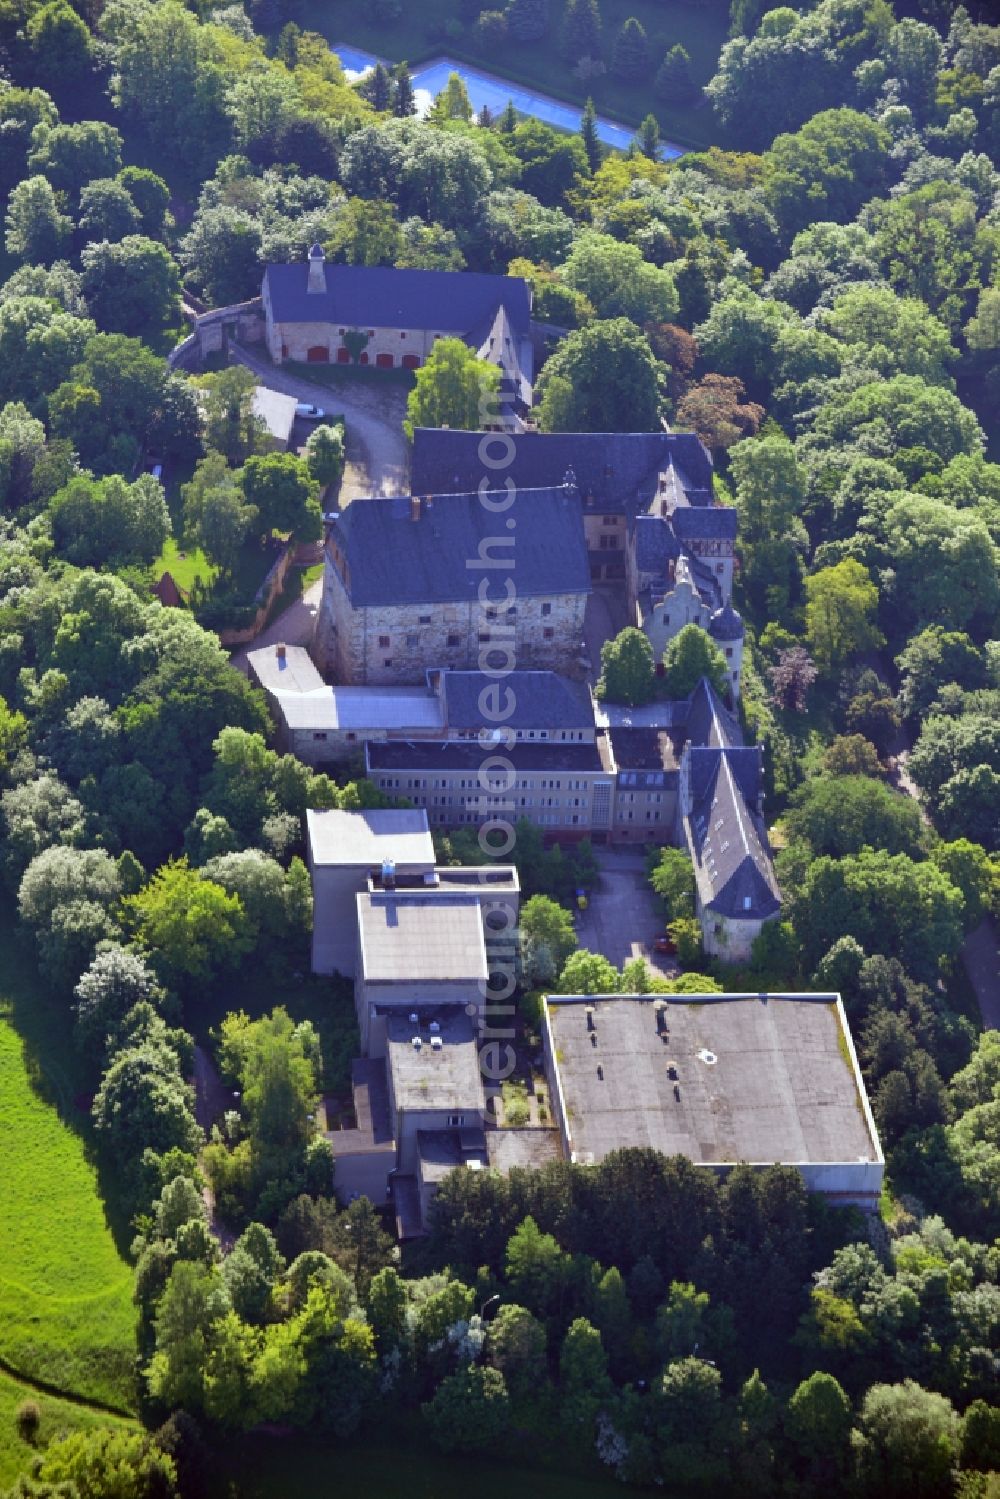 Beichlingen from above - Castle Beichlingen in the state Thuringia. The castle now houses a hotel and museum that is supported by the Friends castle Beichlingen